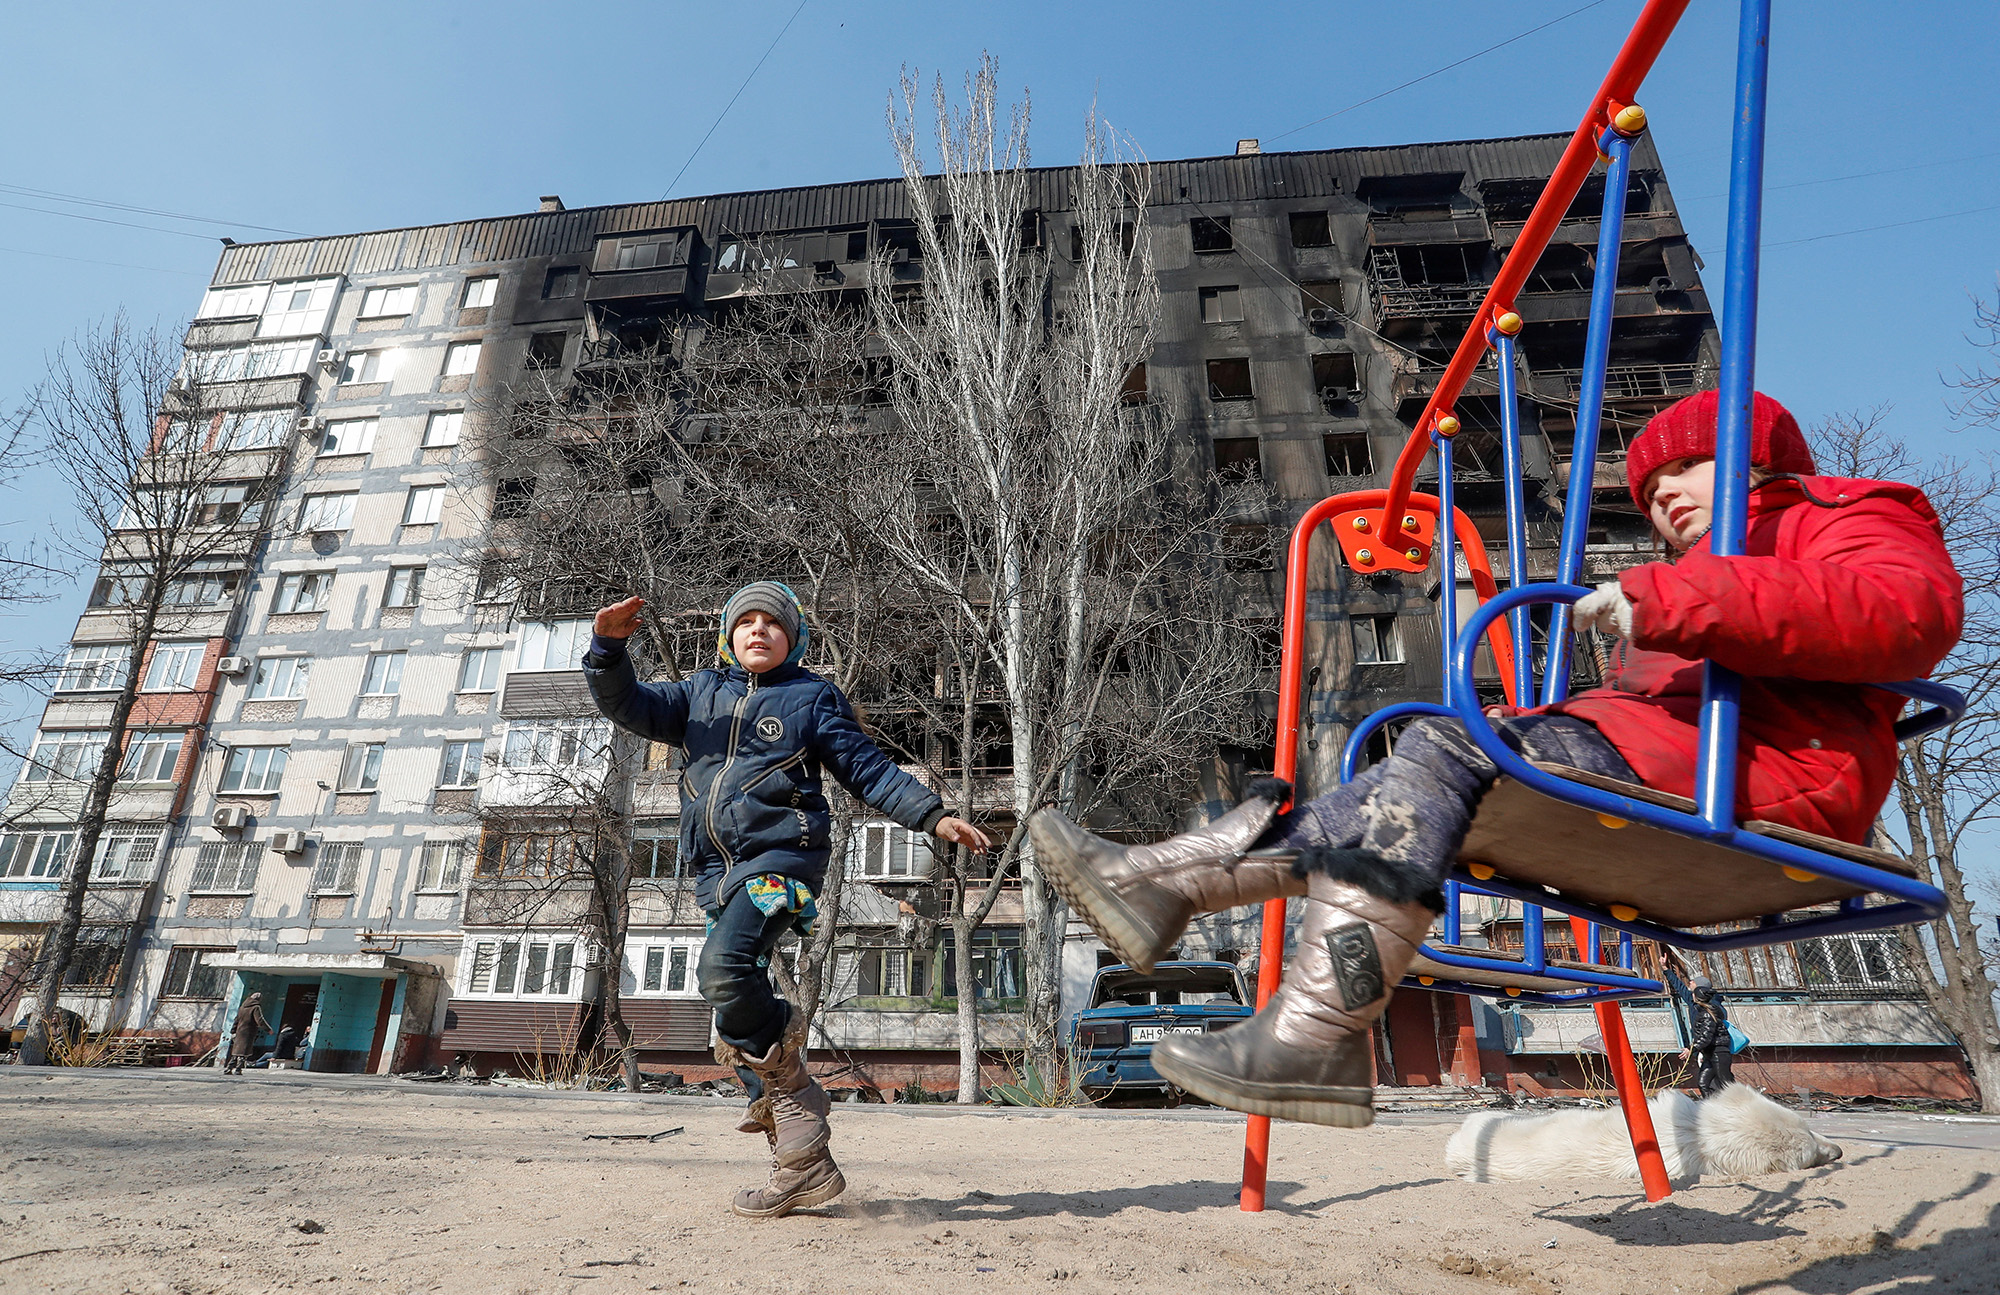 Children play in front of a damaged building in the southern port of Mariupol, Ukraine, on March 23.